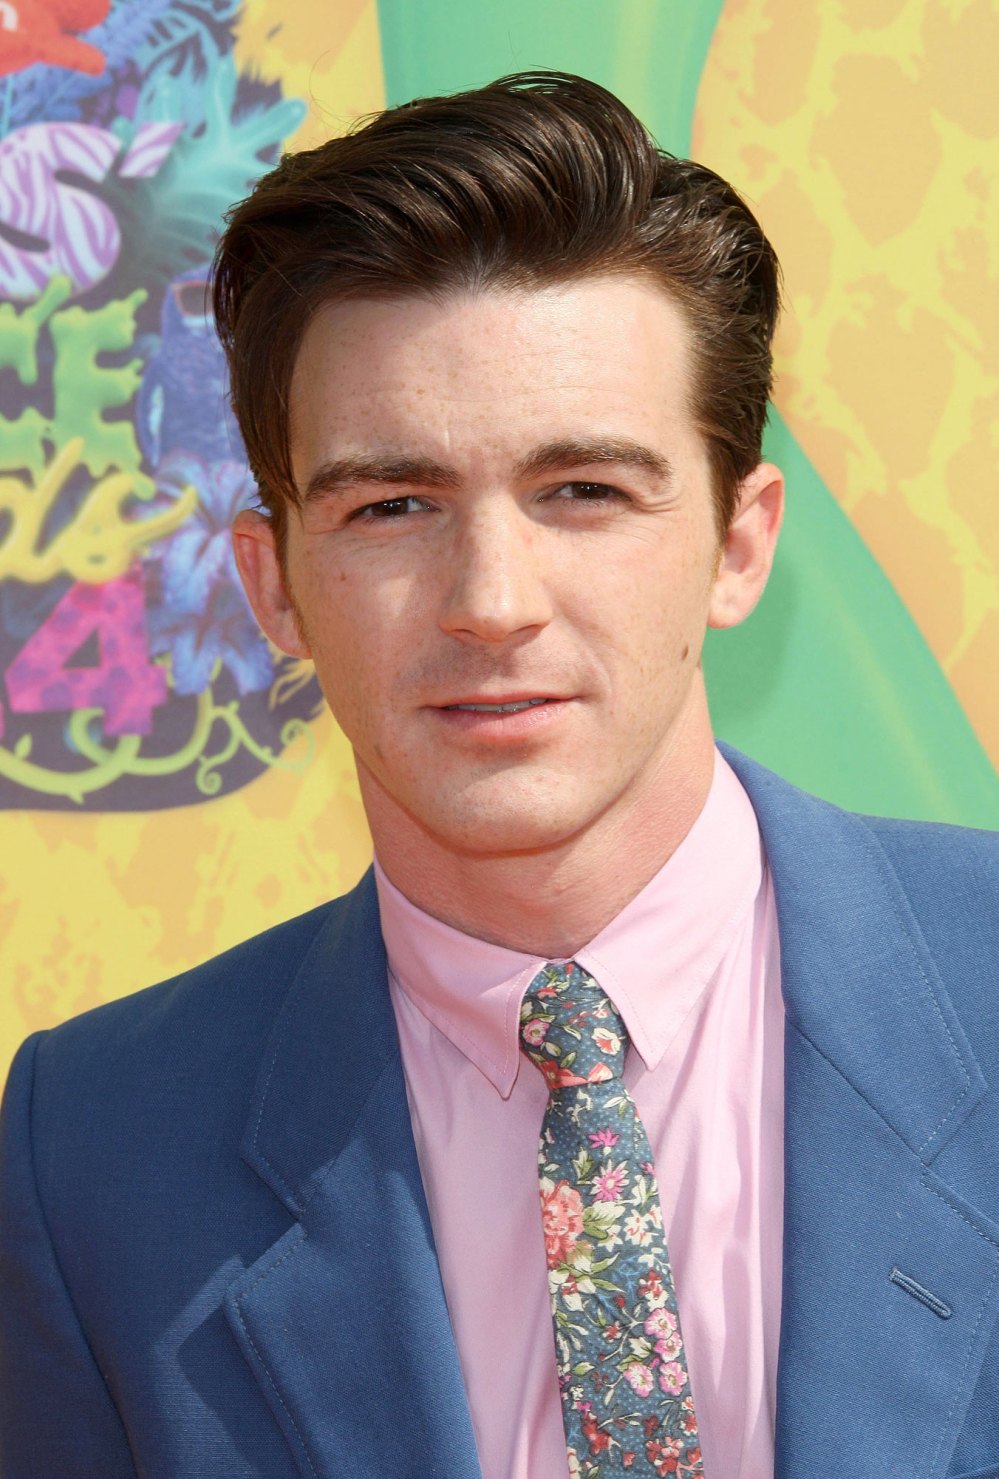 Nickelodeon Star Drake Bell Files for Bankruptcy